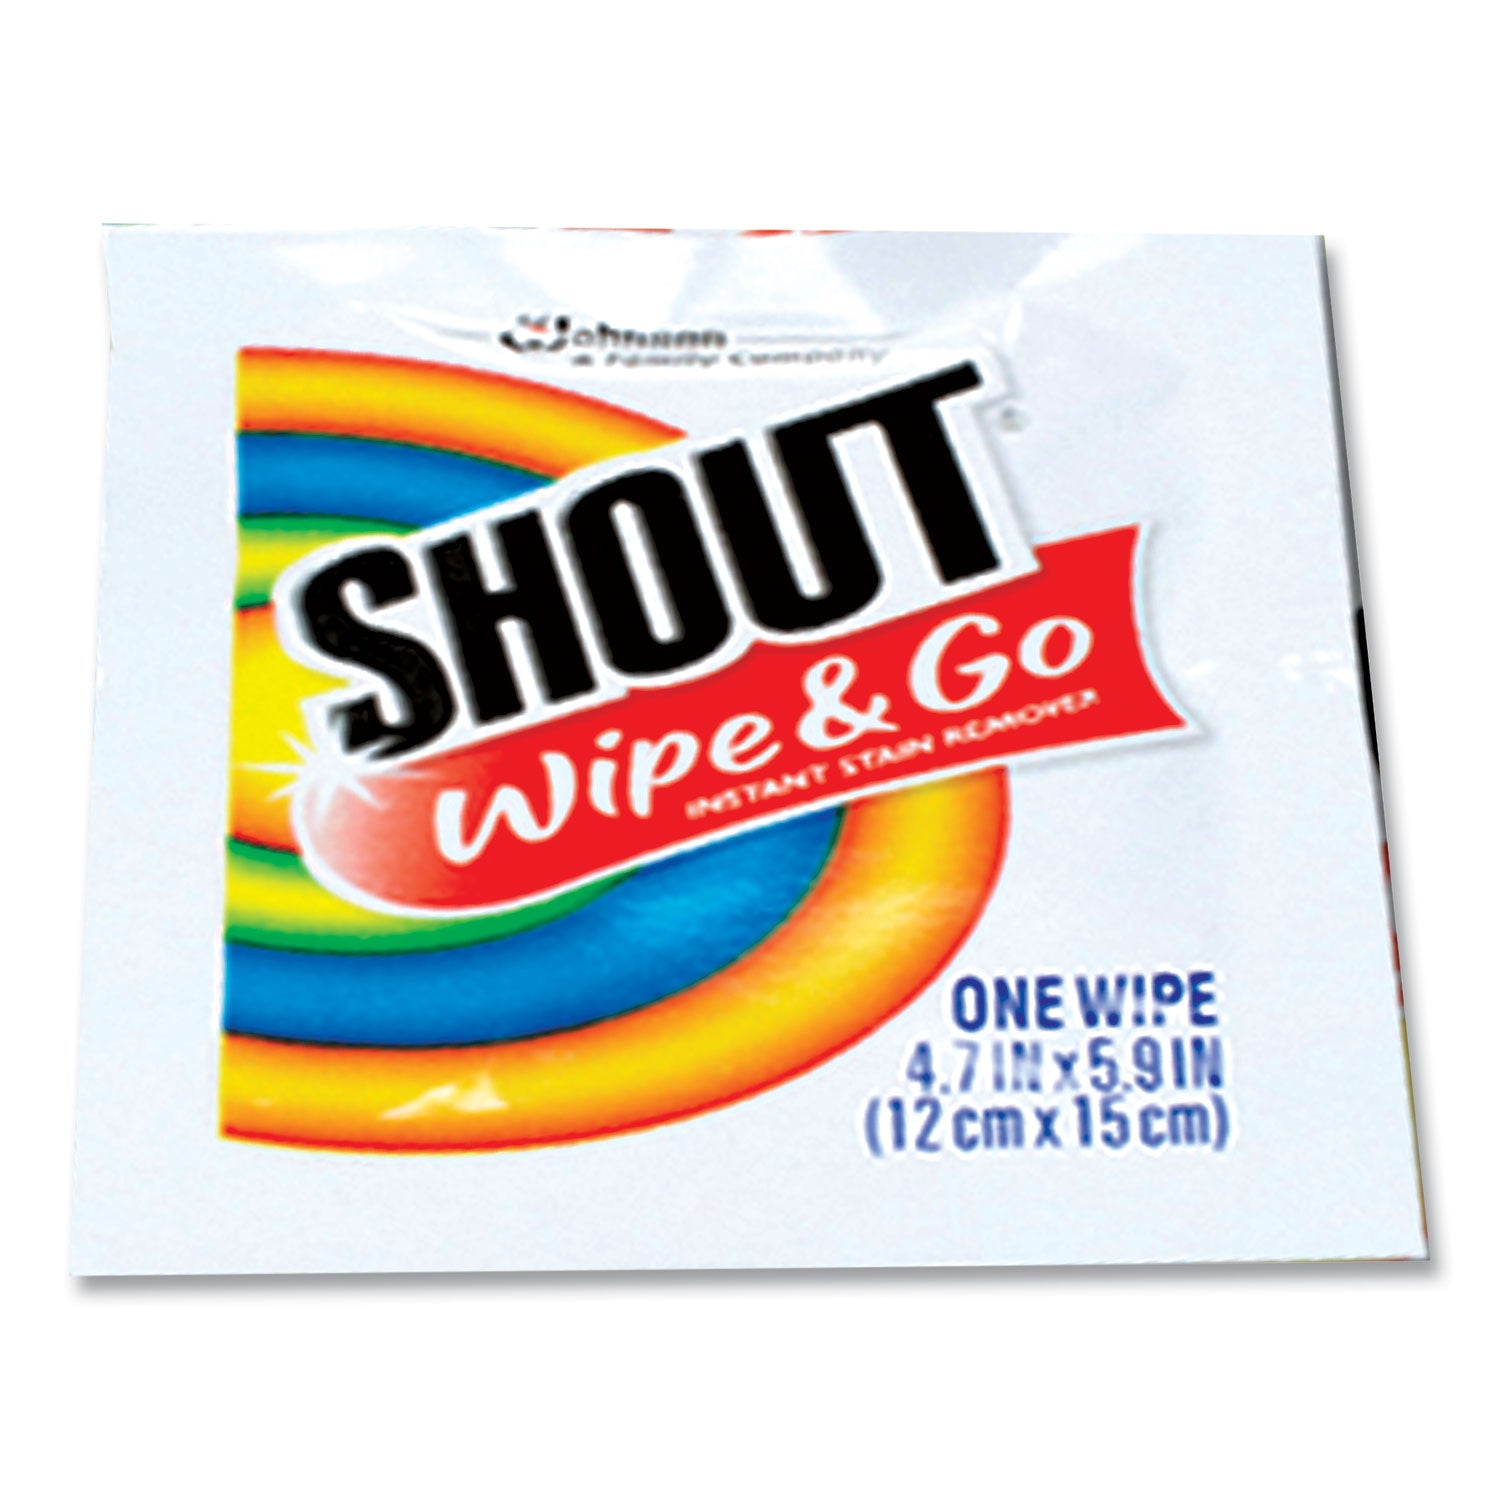 Shout Wipe and Go Instant Stain Remover Textured Wipes New 12 Count, 2 Pack